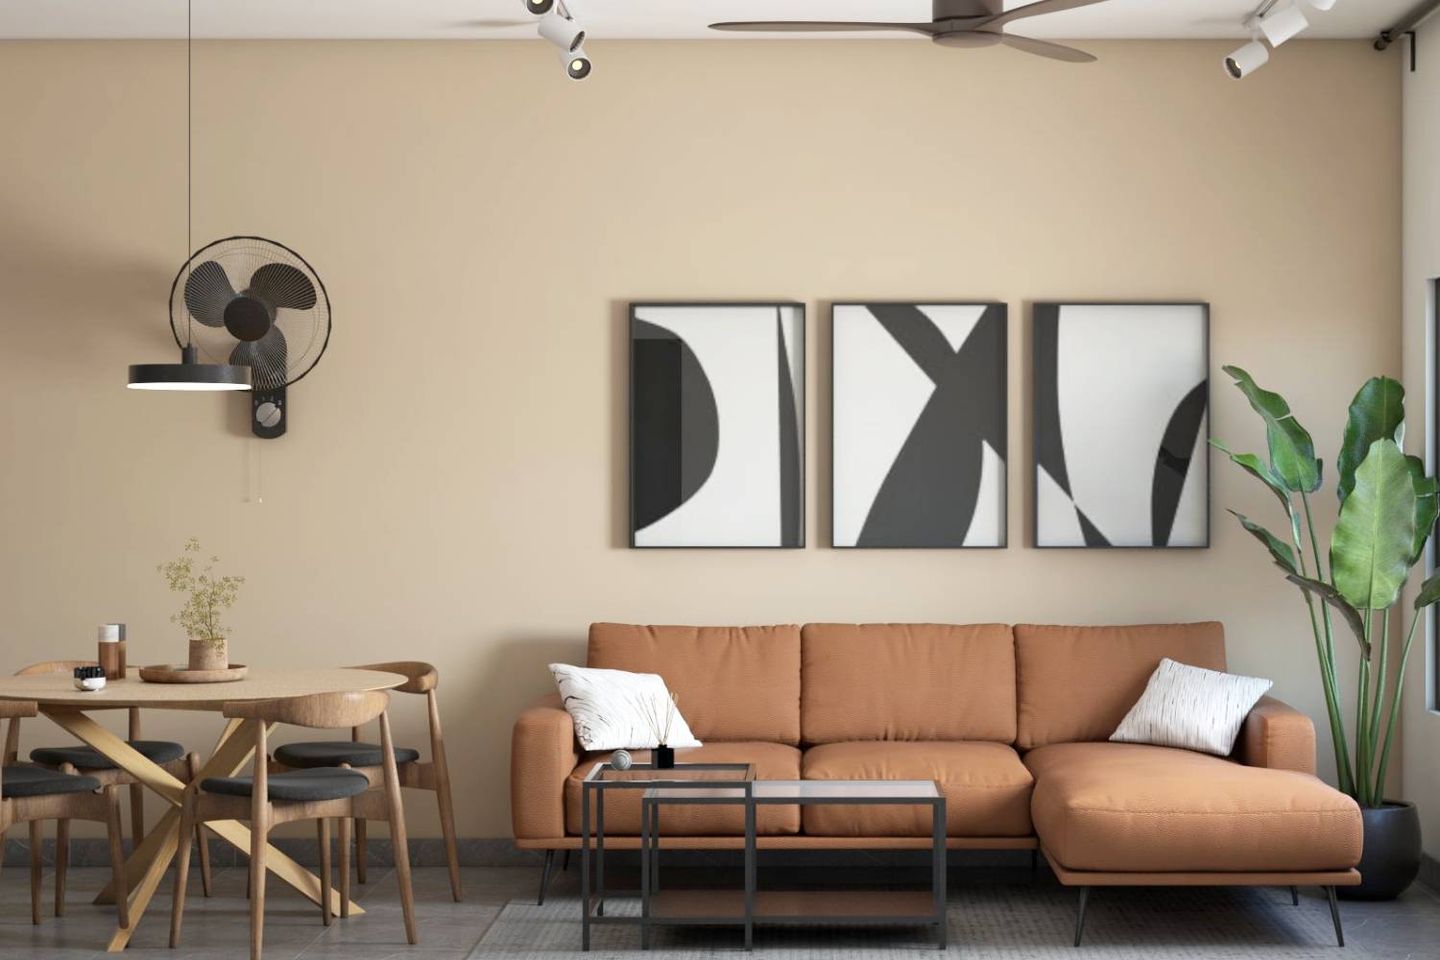 Beige Wall Paint Design For Living Room With With Tan Sectional Sofa And Abstract Wall Art -Livspace